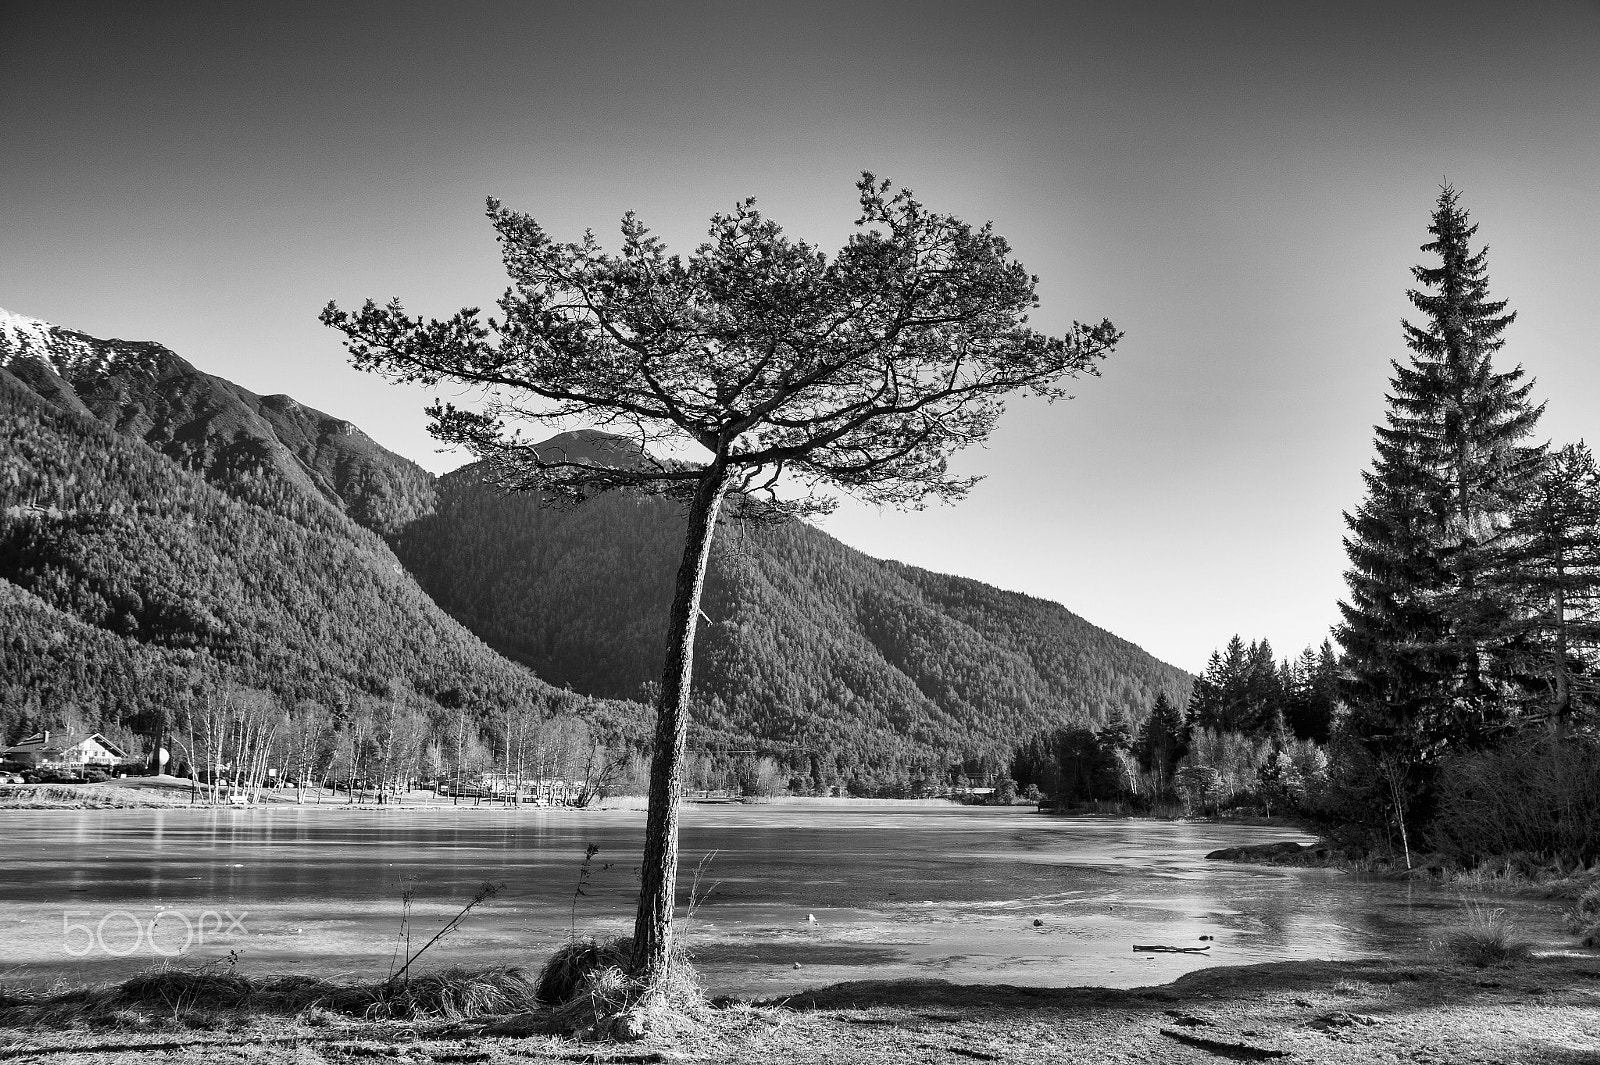 Sony SLT-A58 sample photo. Baum am see / tree by the lake photography